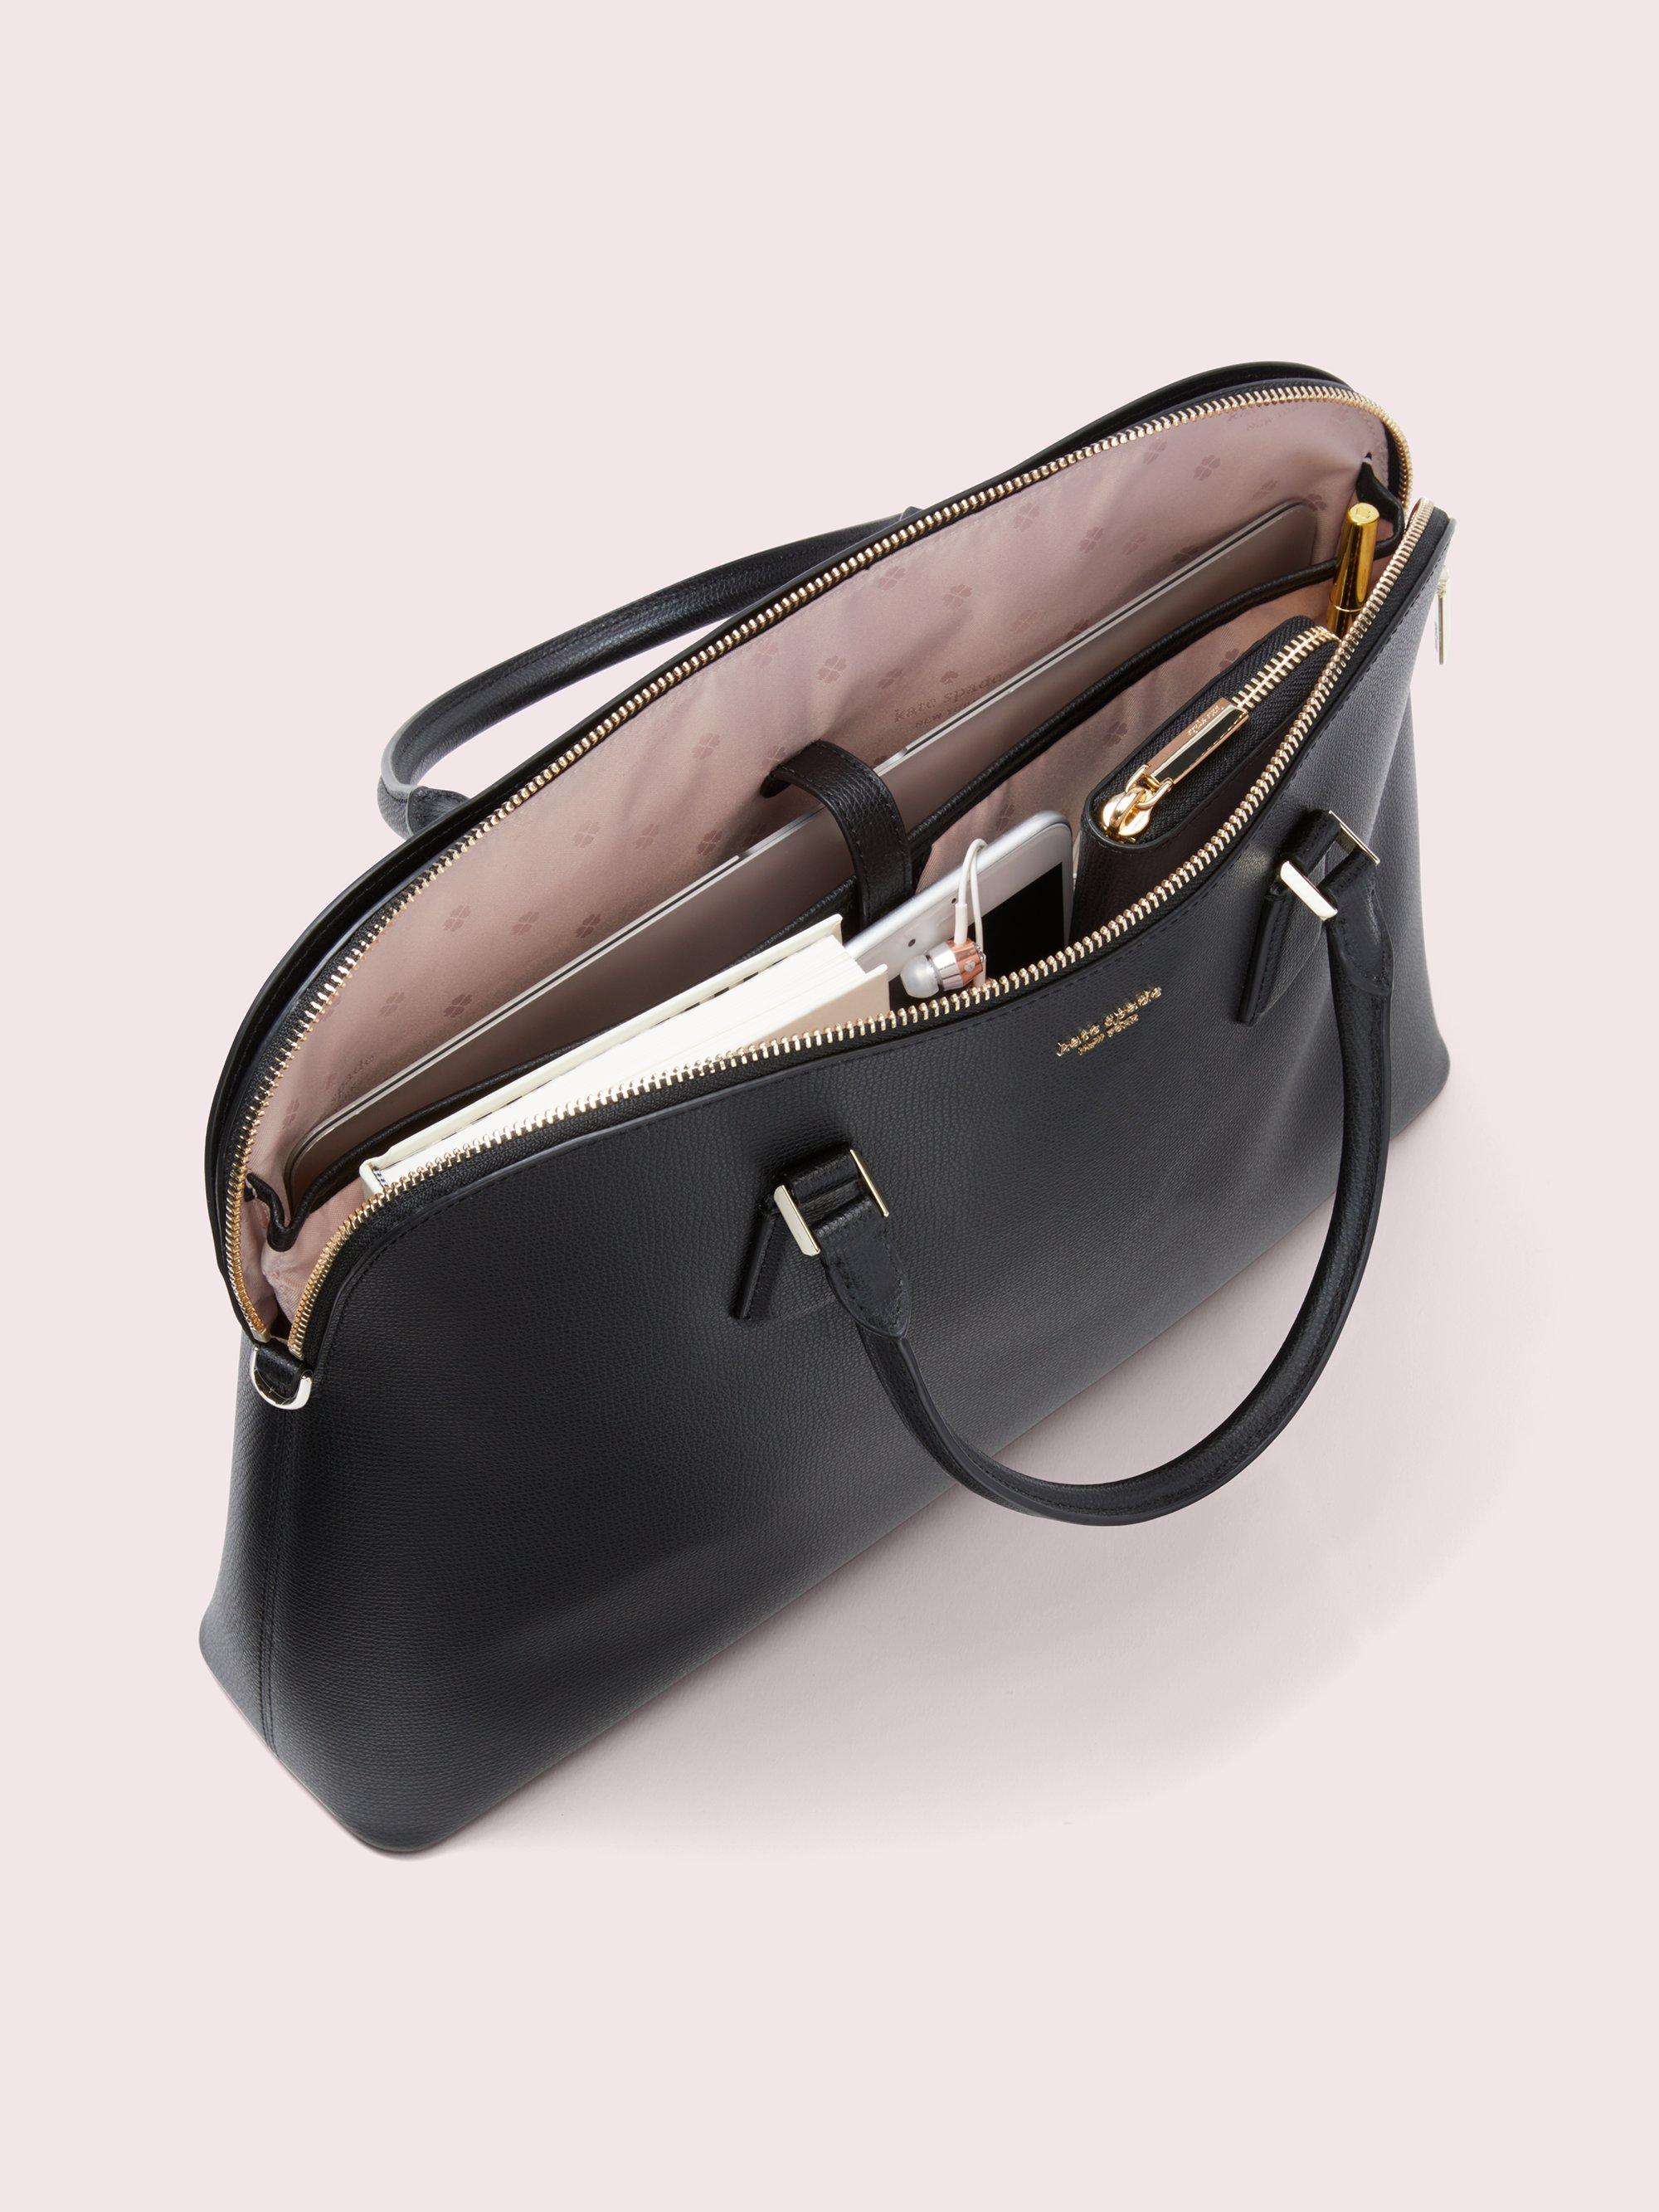 15 Stylish Bags & Cases For Your Devices - NZ Herald